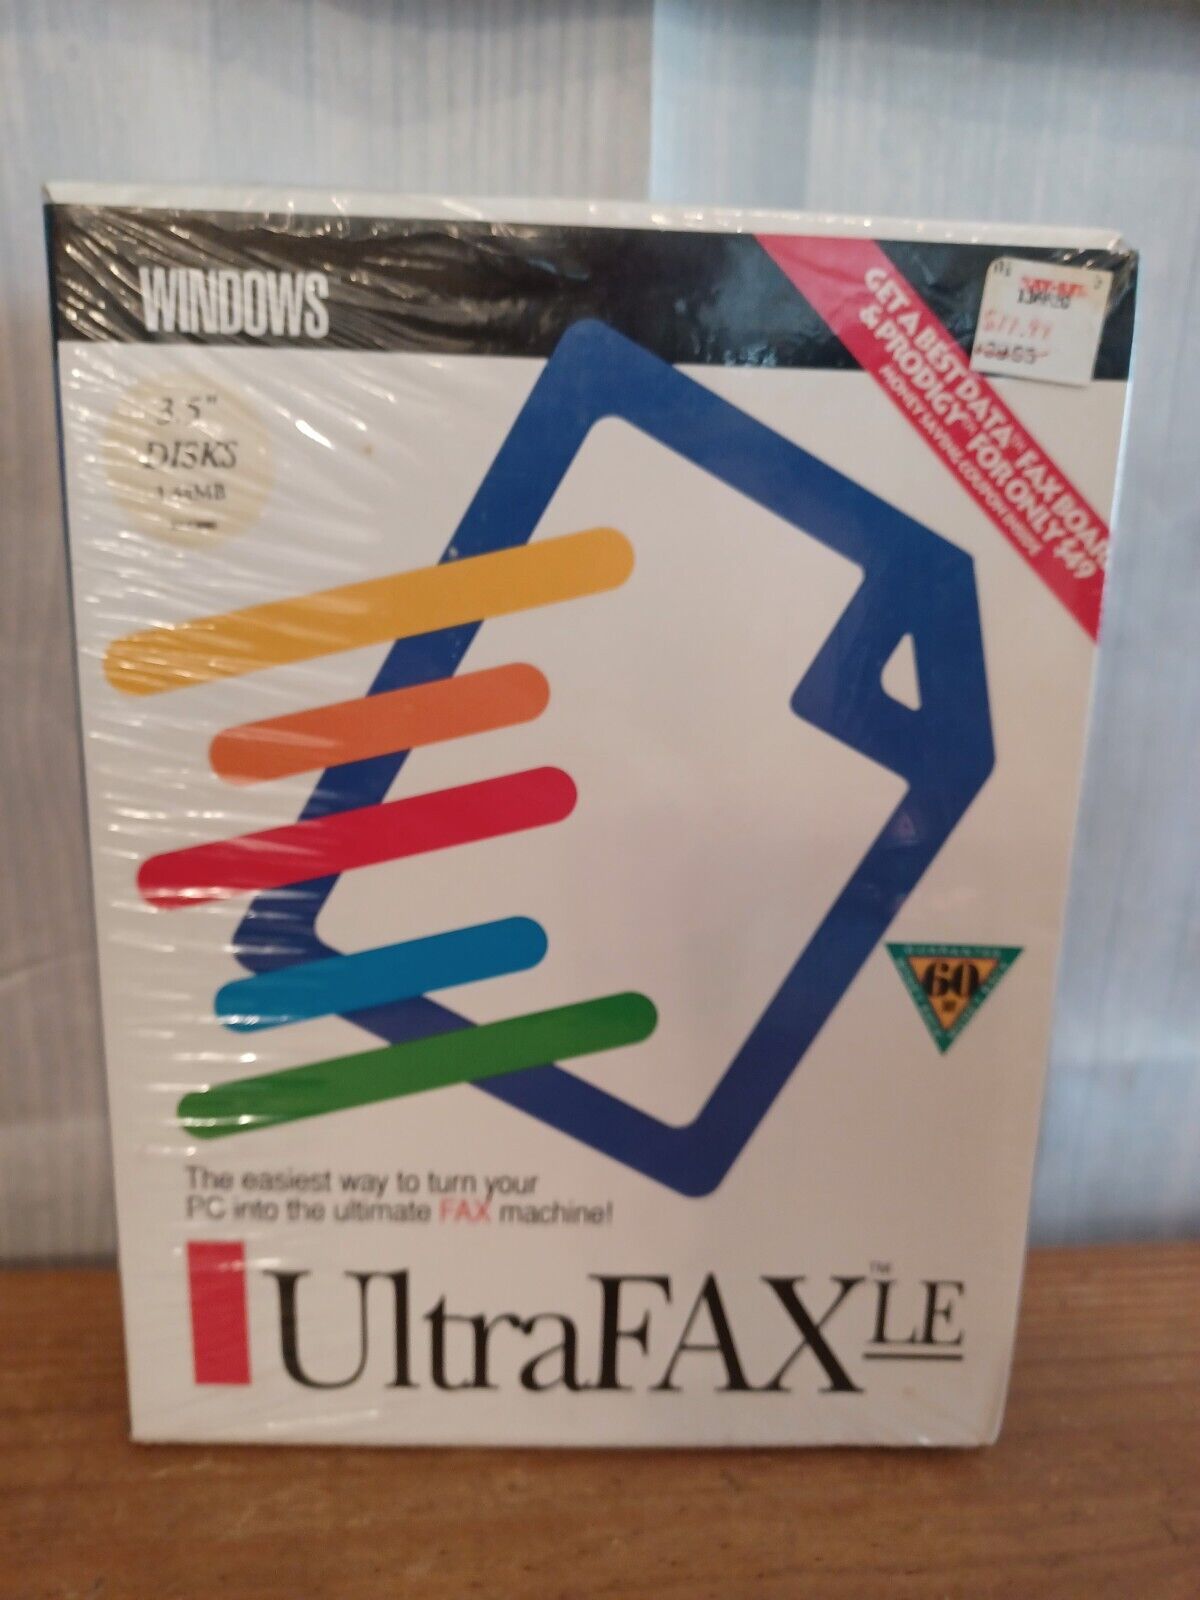 NOS Windows Ultrafax LE Vintage Software PC 3.5 Disk Fax 1993 Sealed